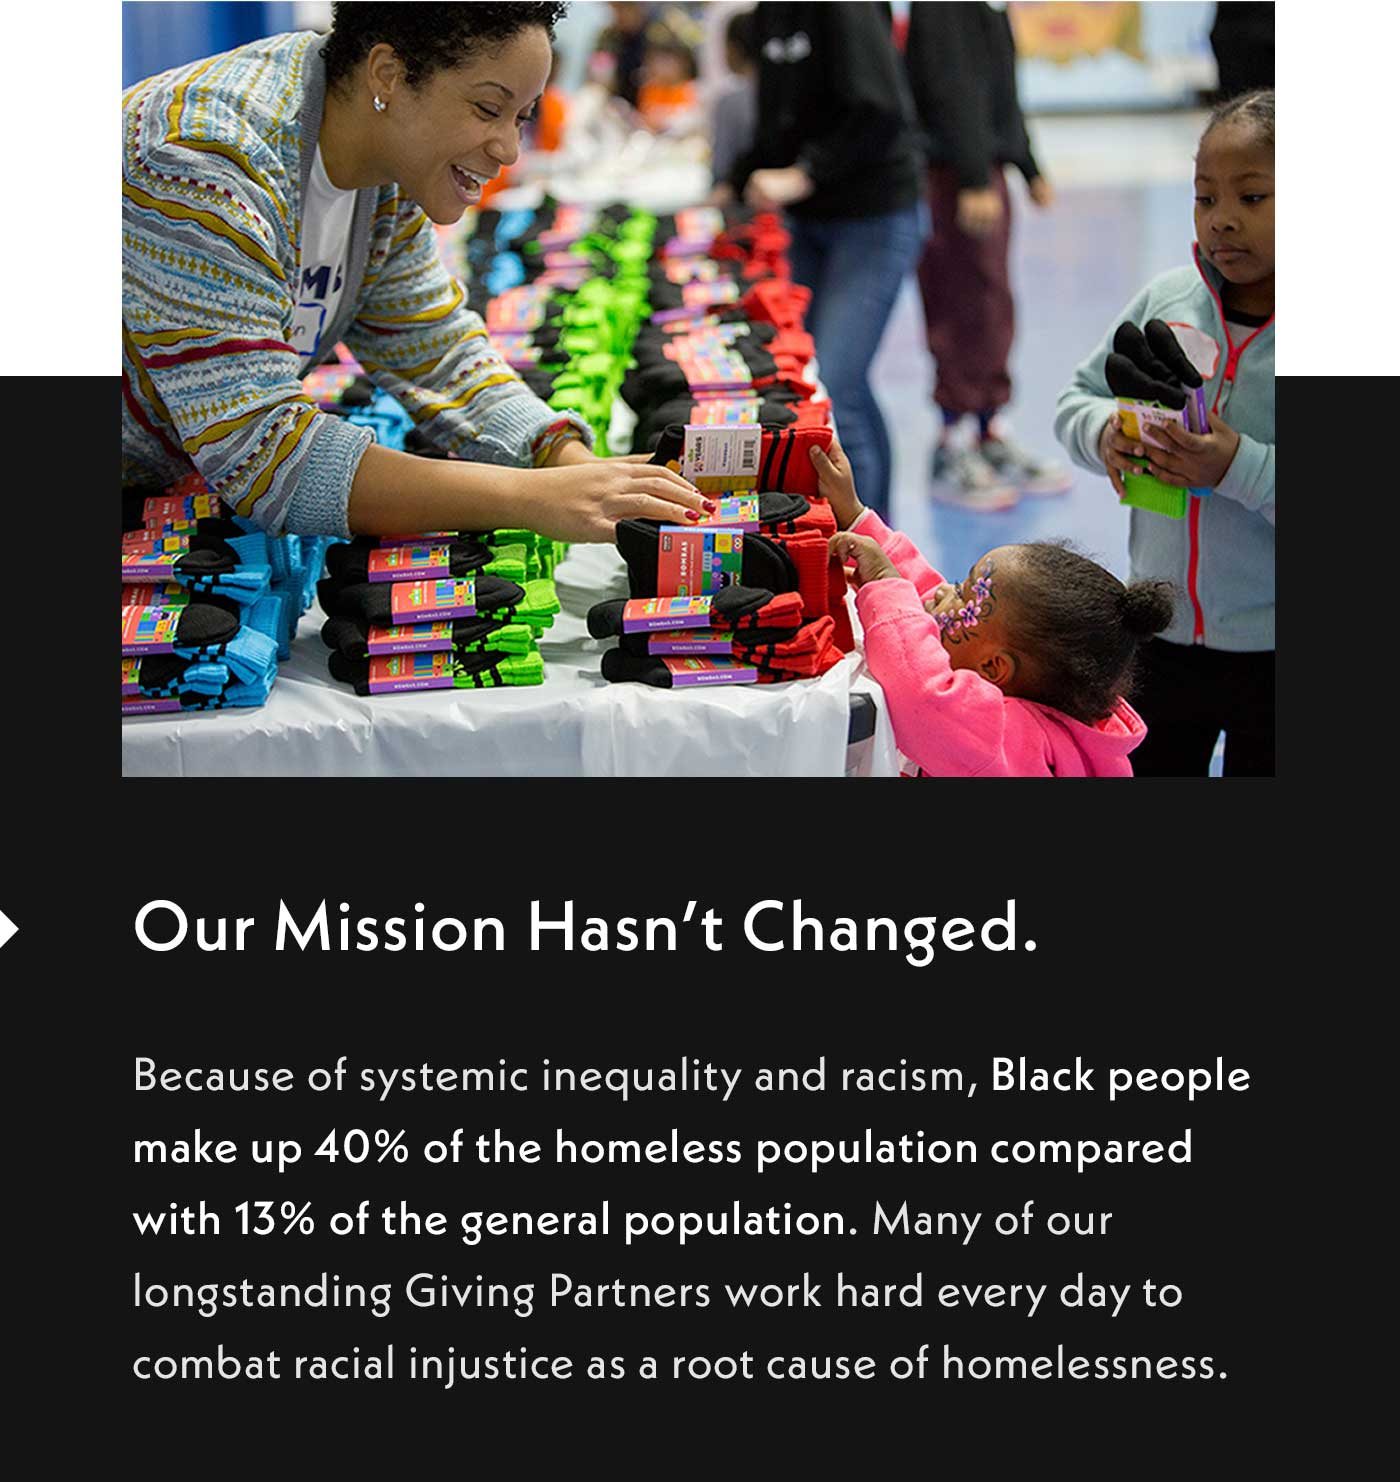 Our mission hasn't changed. Because of systemic inequality and racism, Black people make up 40% of the homeless population compared with 13% of the general population. Many of our longstanding Giving Partners work hard every to combat racial injustice as a root cause of homelessness.